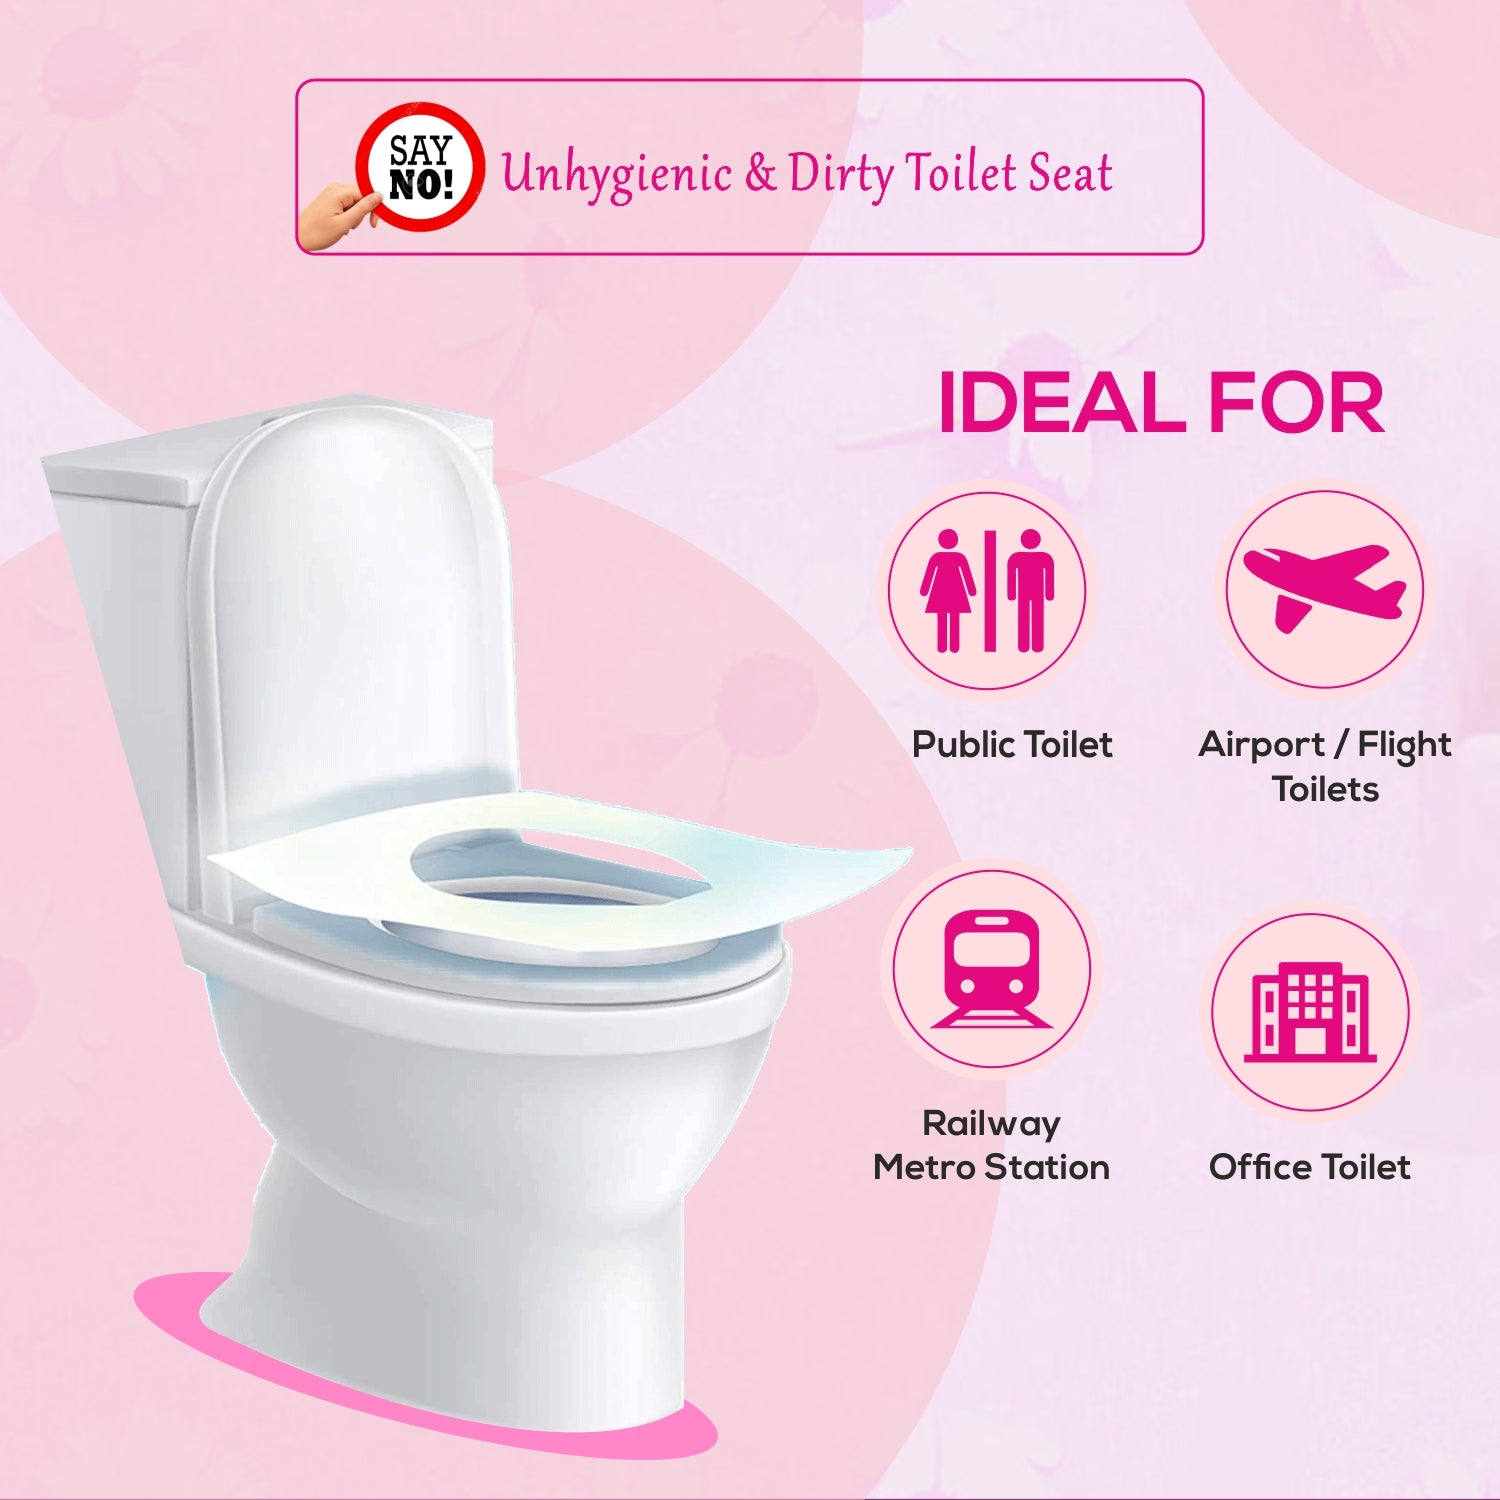 Paper toilet seat cover - For dirty toilet seats - Biodegradable